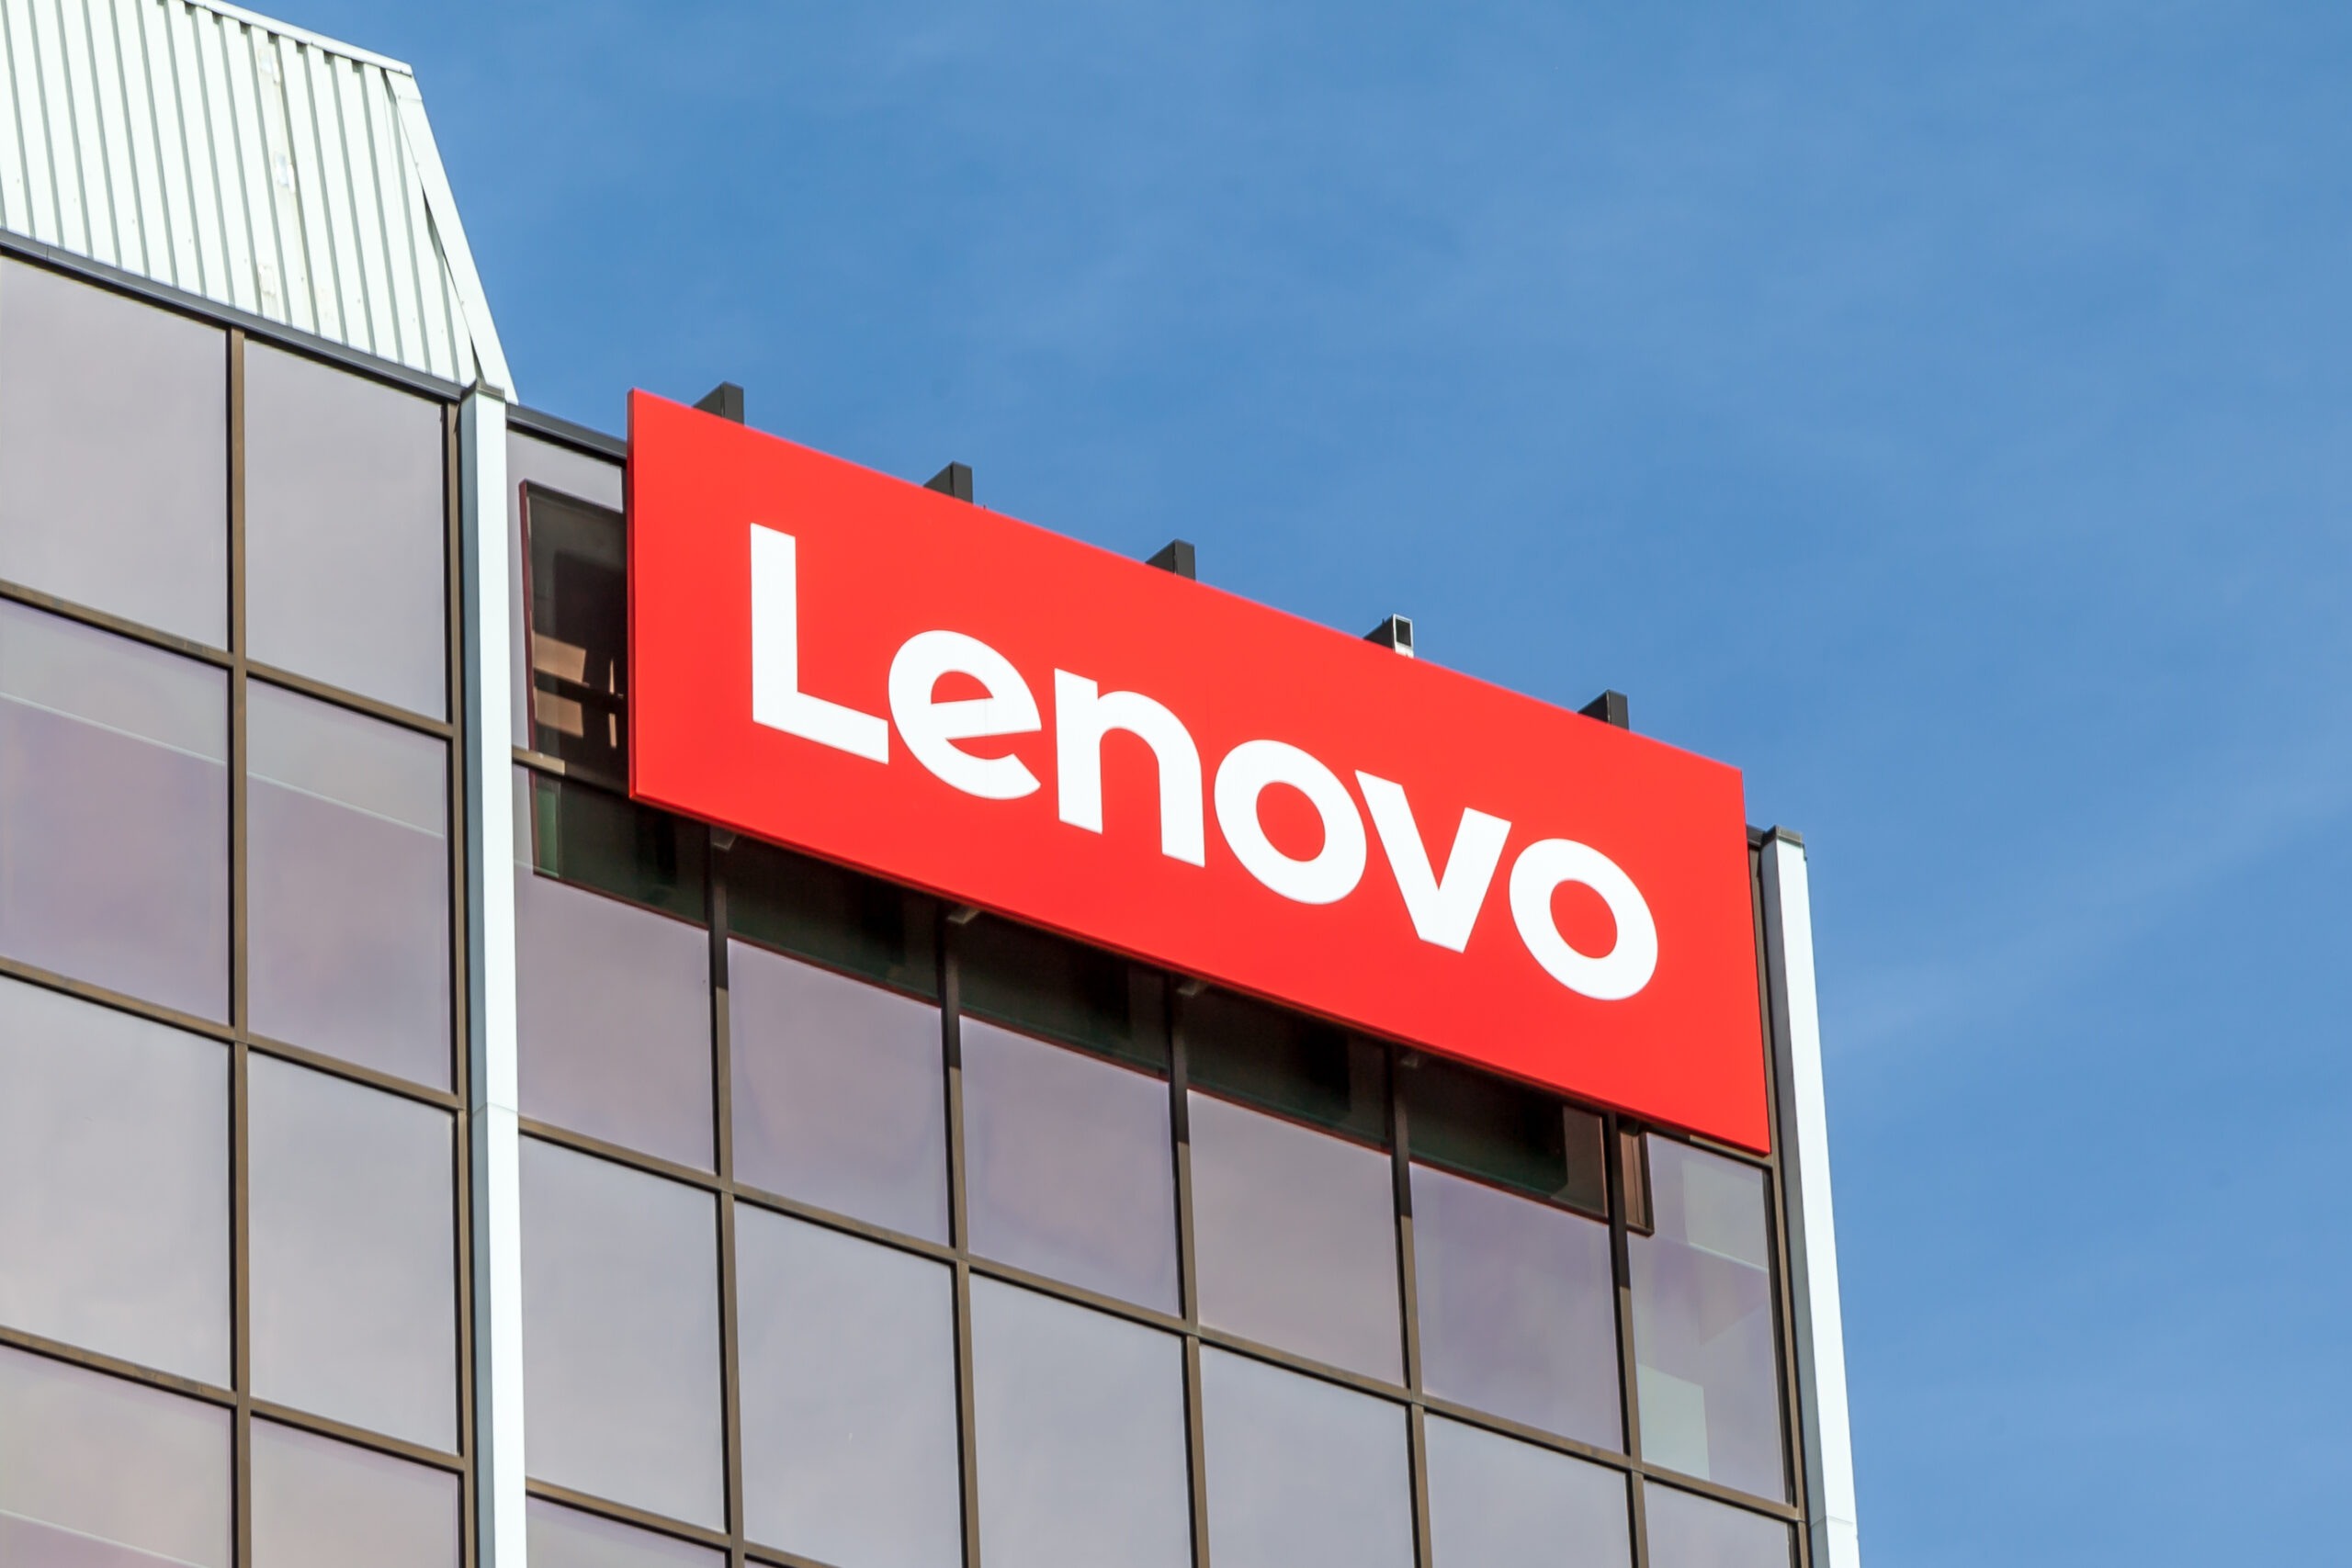 China’s Lenovo Continues Revenue Growth Streak, Surpassing Expectations